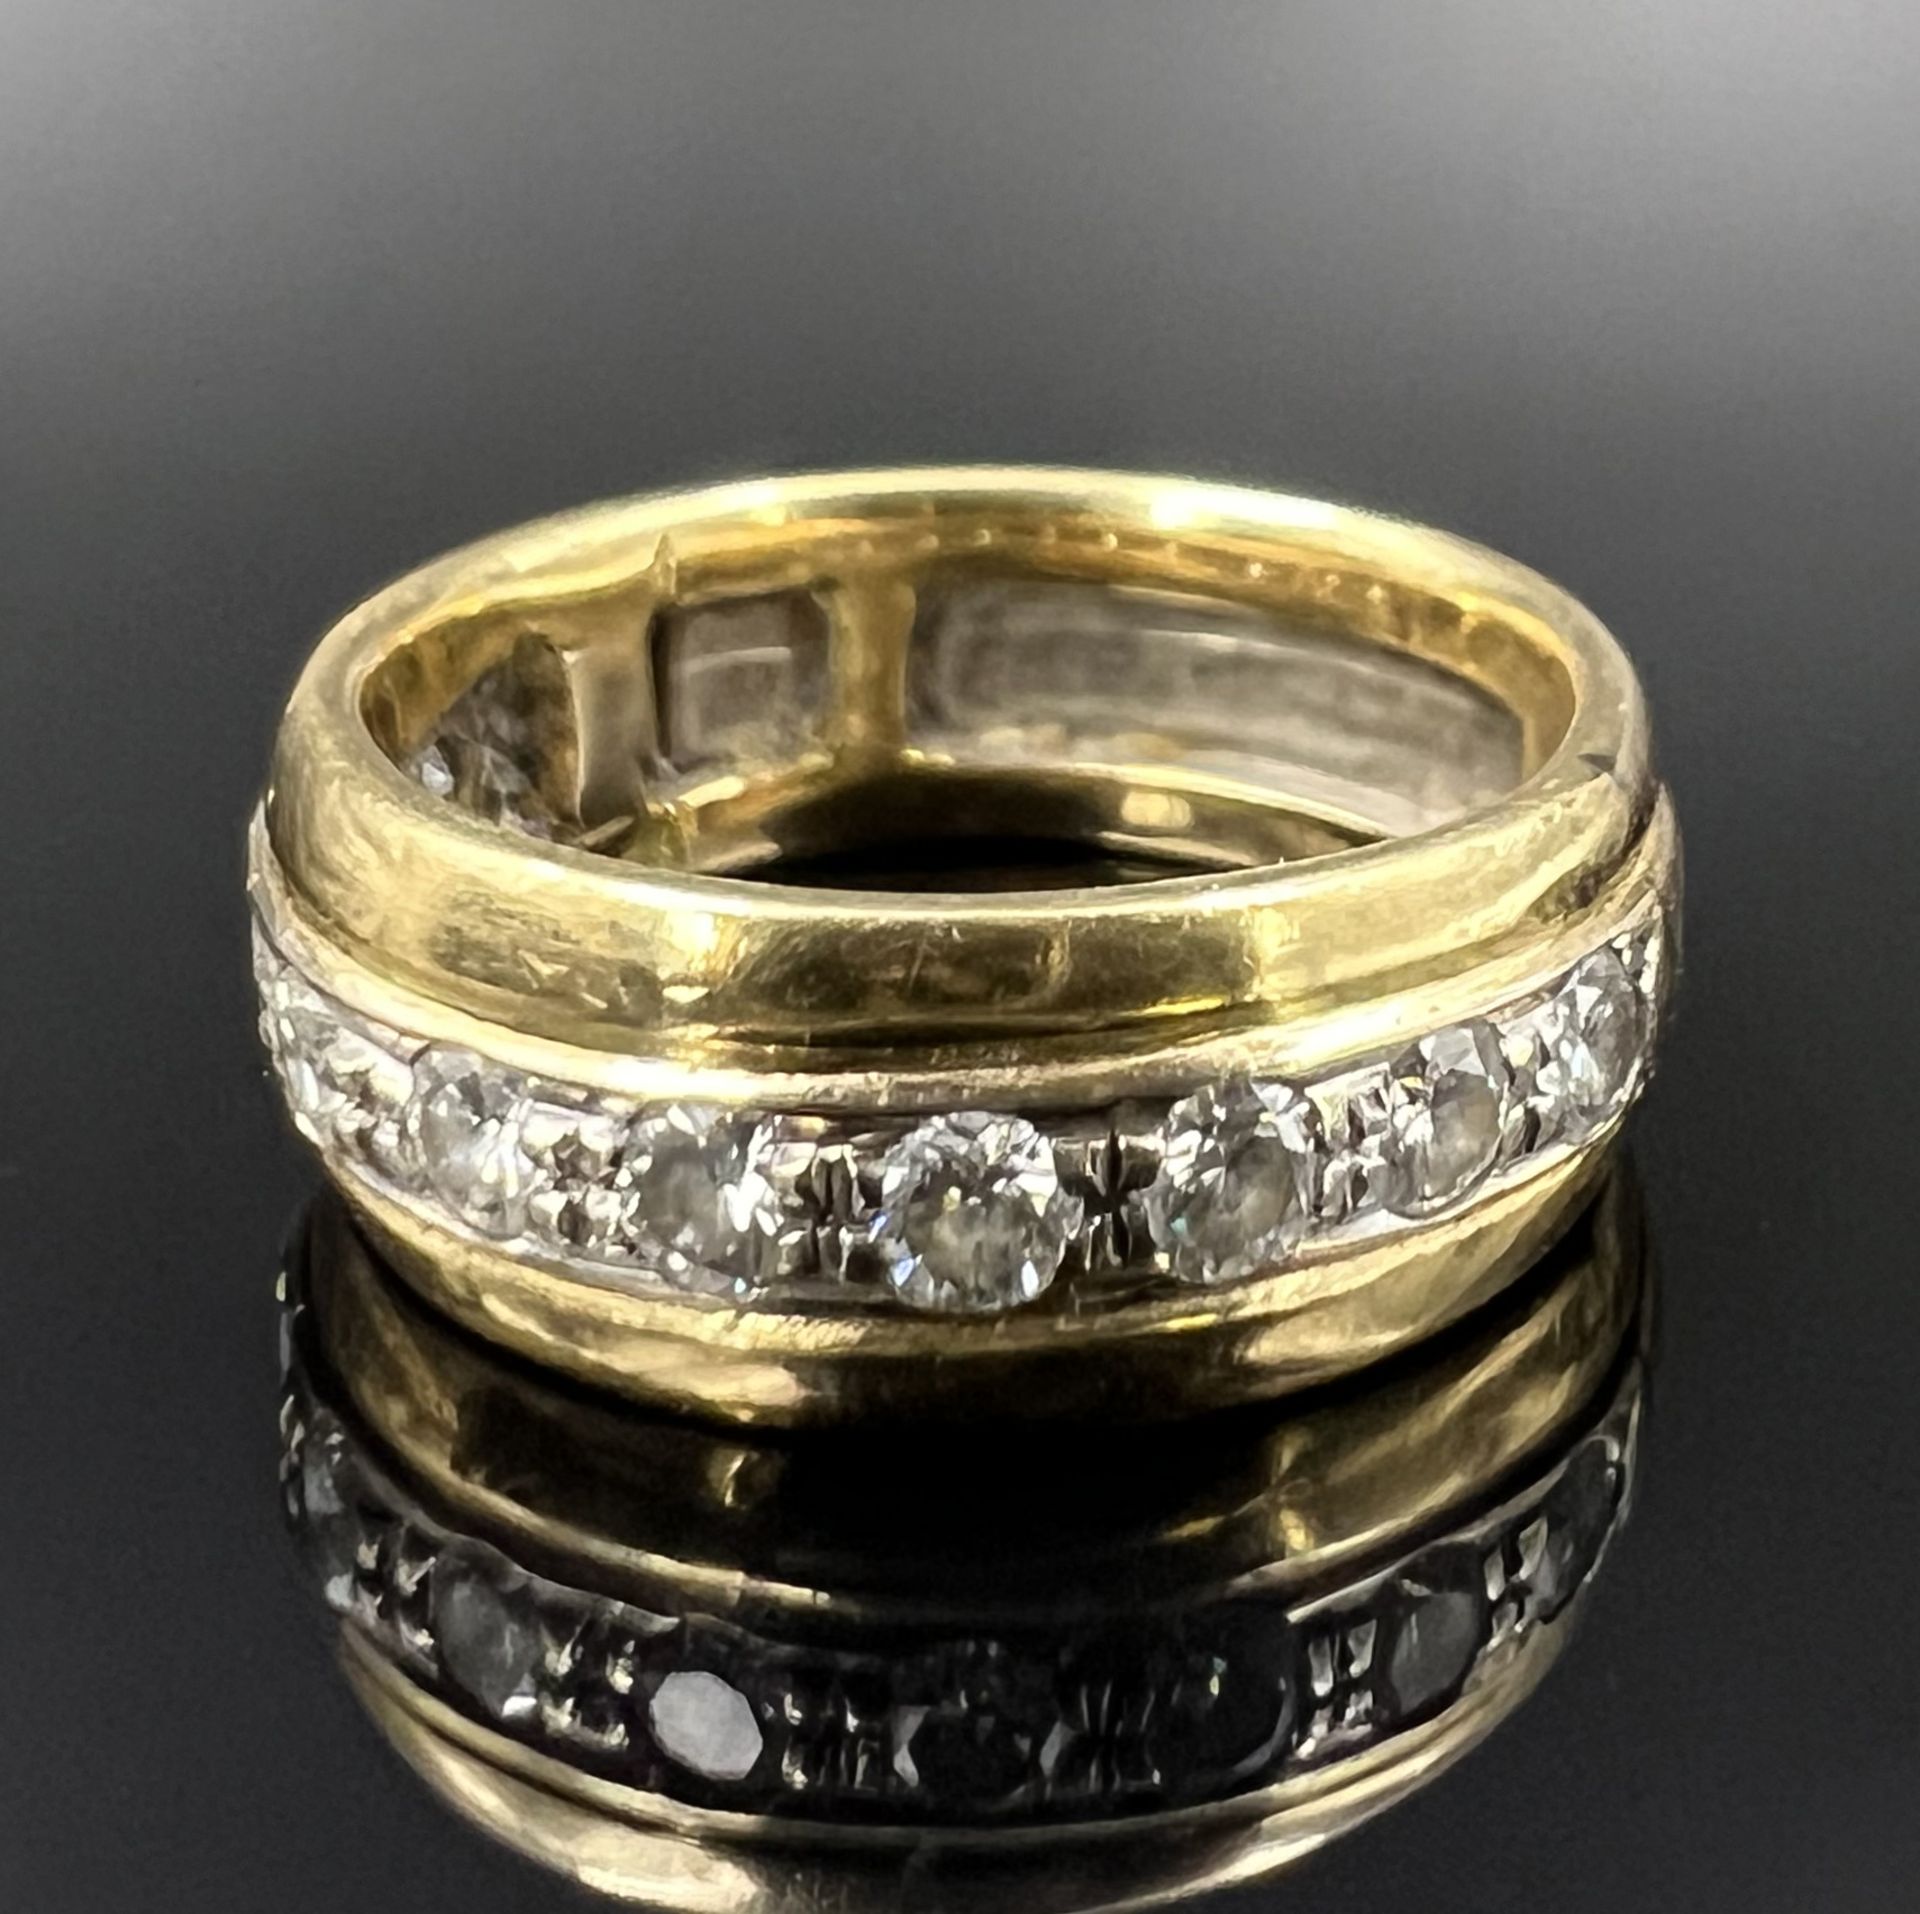 Ladies' ring. 750 yellow gold and white gold with 10 small diamonds. - Image 2 of 10